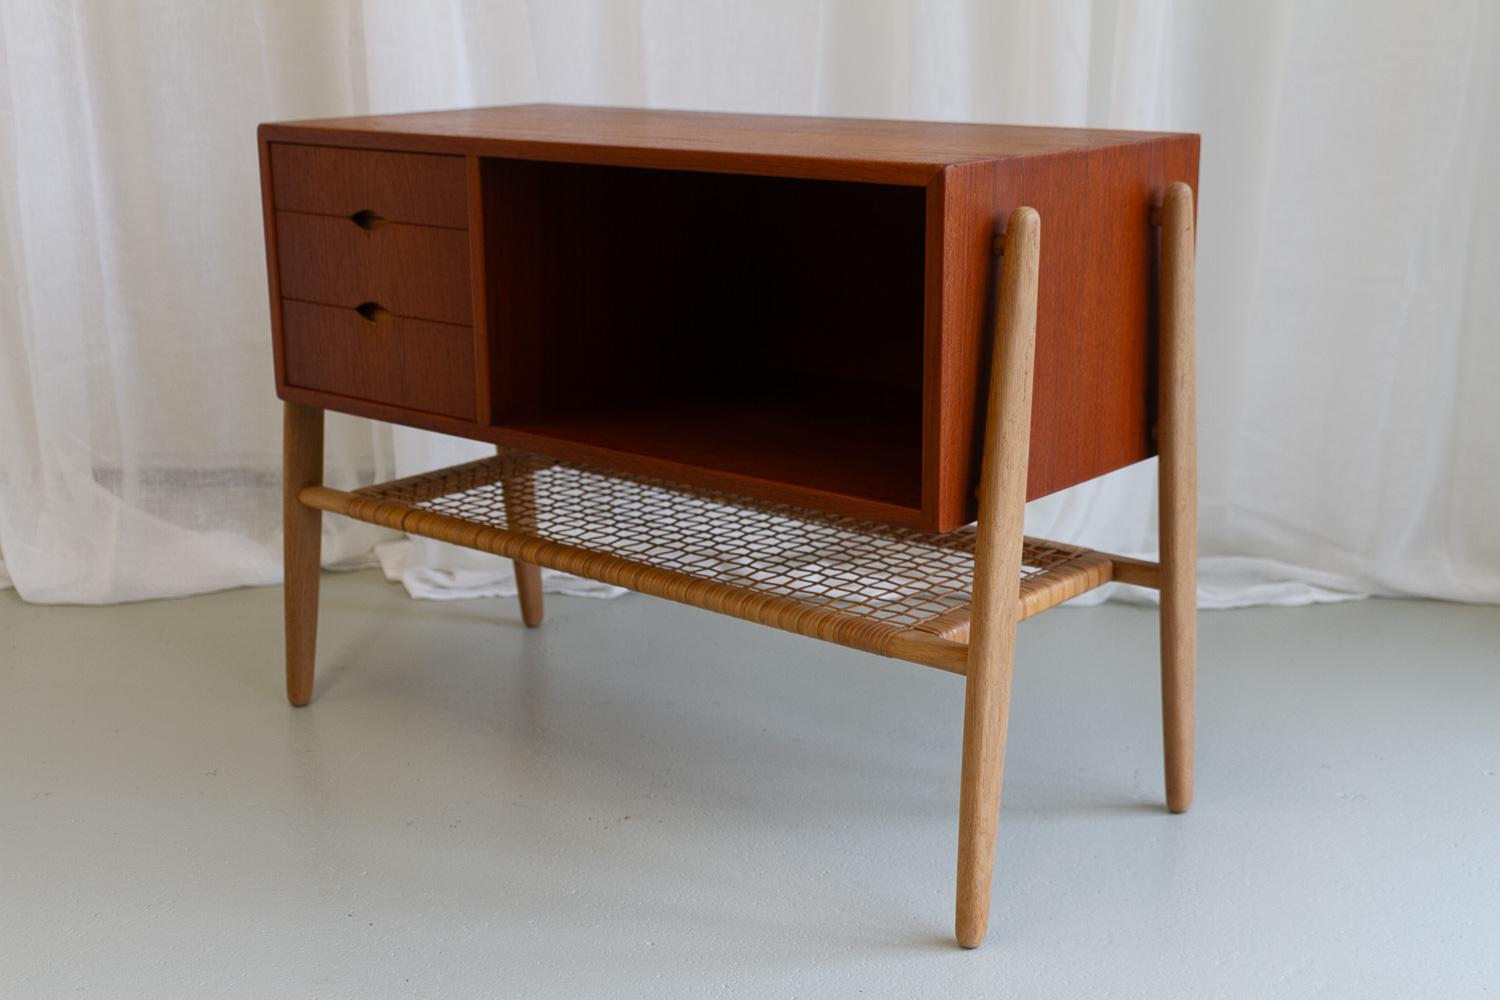 Danish Modern Teak and Oak Console Table with Cane Shelf, 1960s For Sale 1